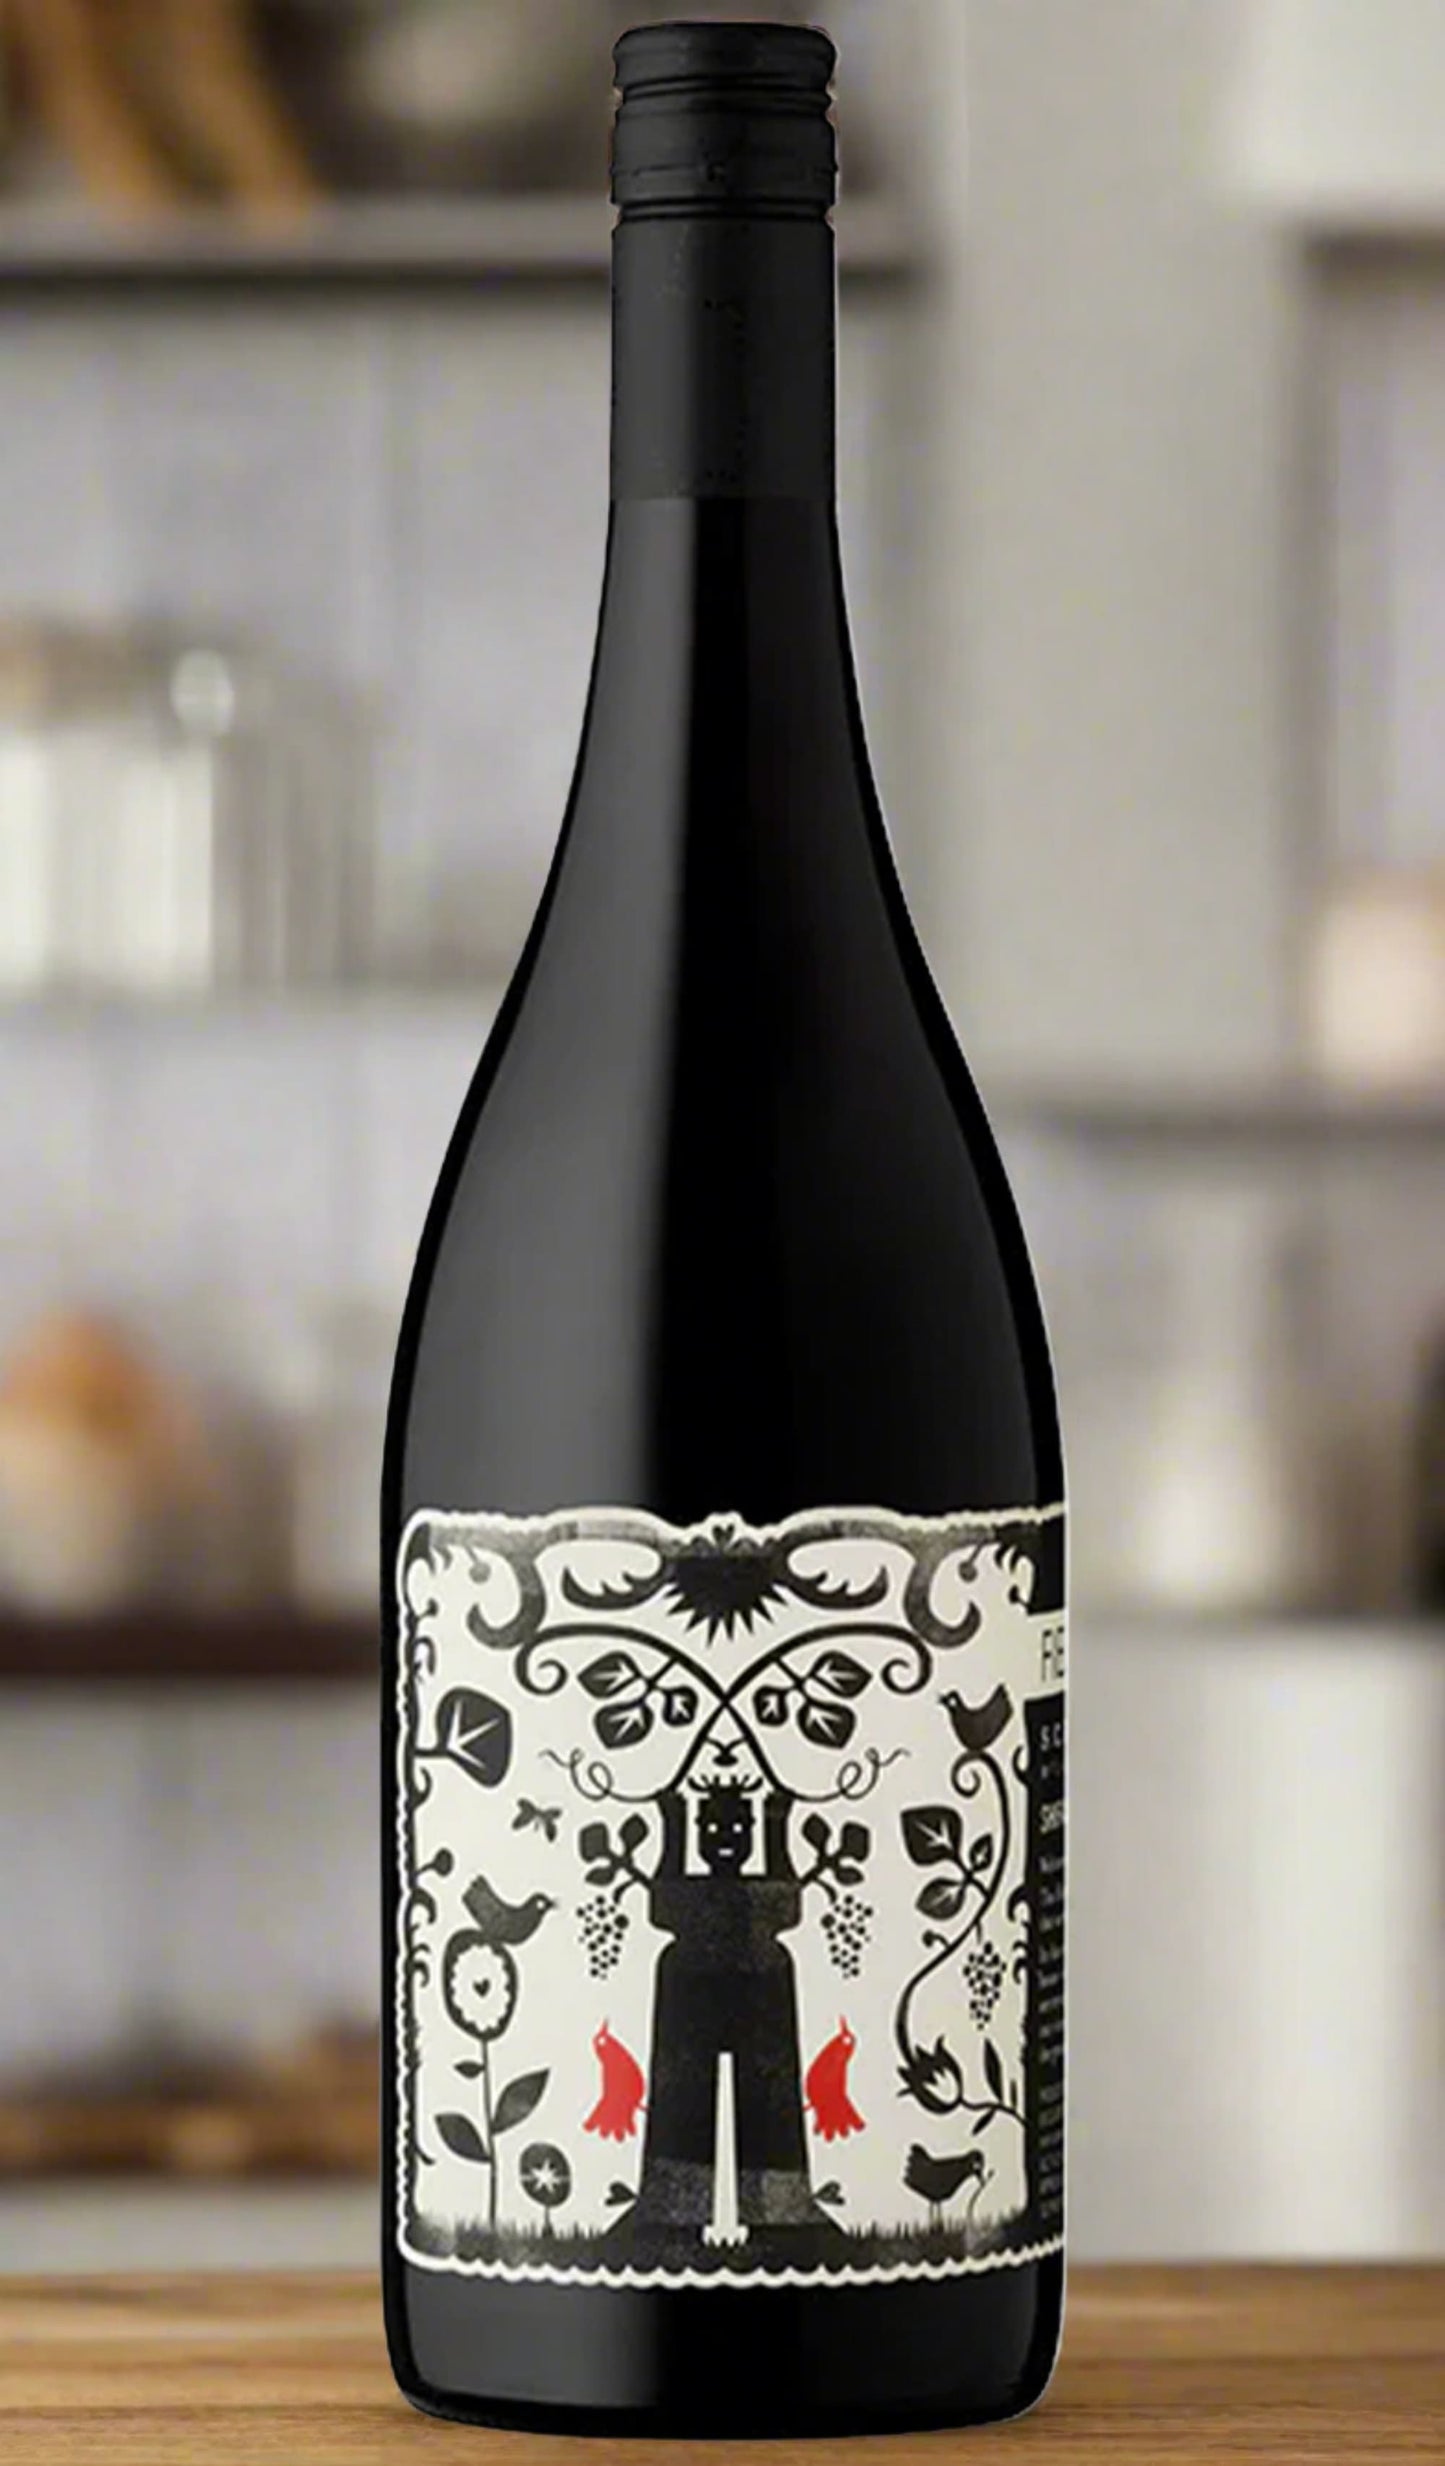 Find out more or buy SC Pannell McLaren Vale Field Street Shiraz 2022 online at Wine Sellers Direct - Australia’s independent liquor specialists.